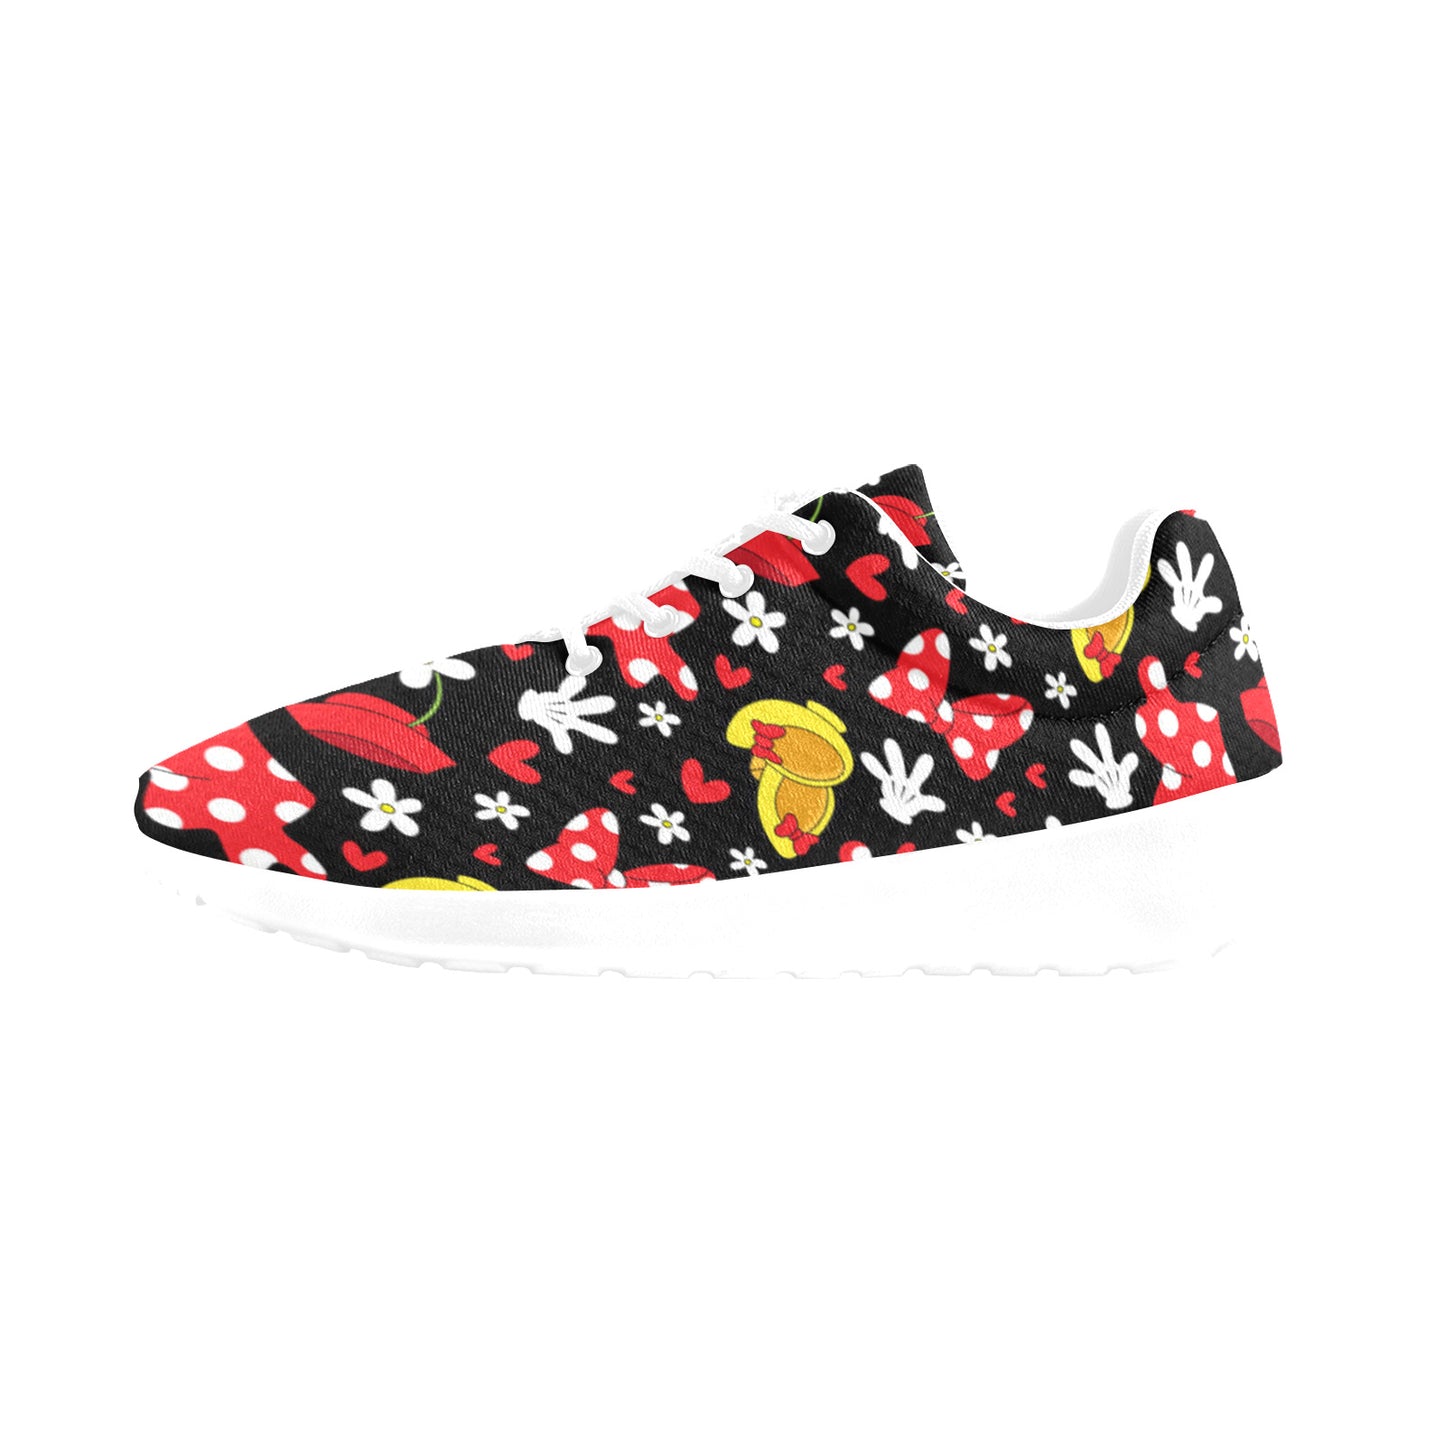 All About The Bows Women's Athletic Shoes